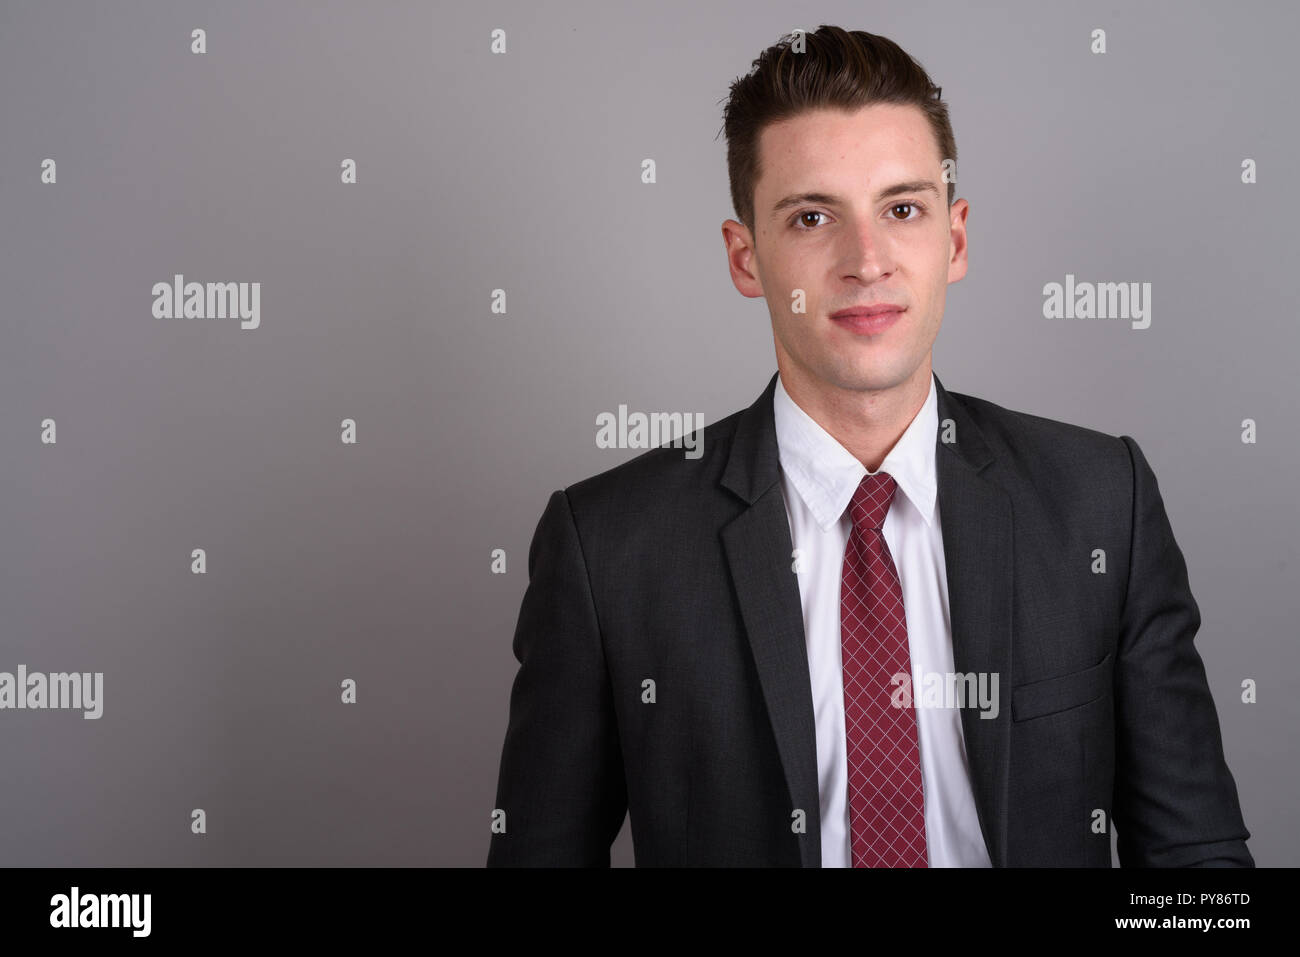 Young handsome businessman wearing suit against gray background Stock Photo